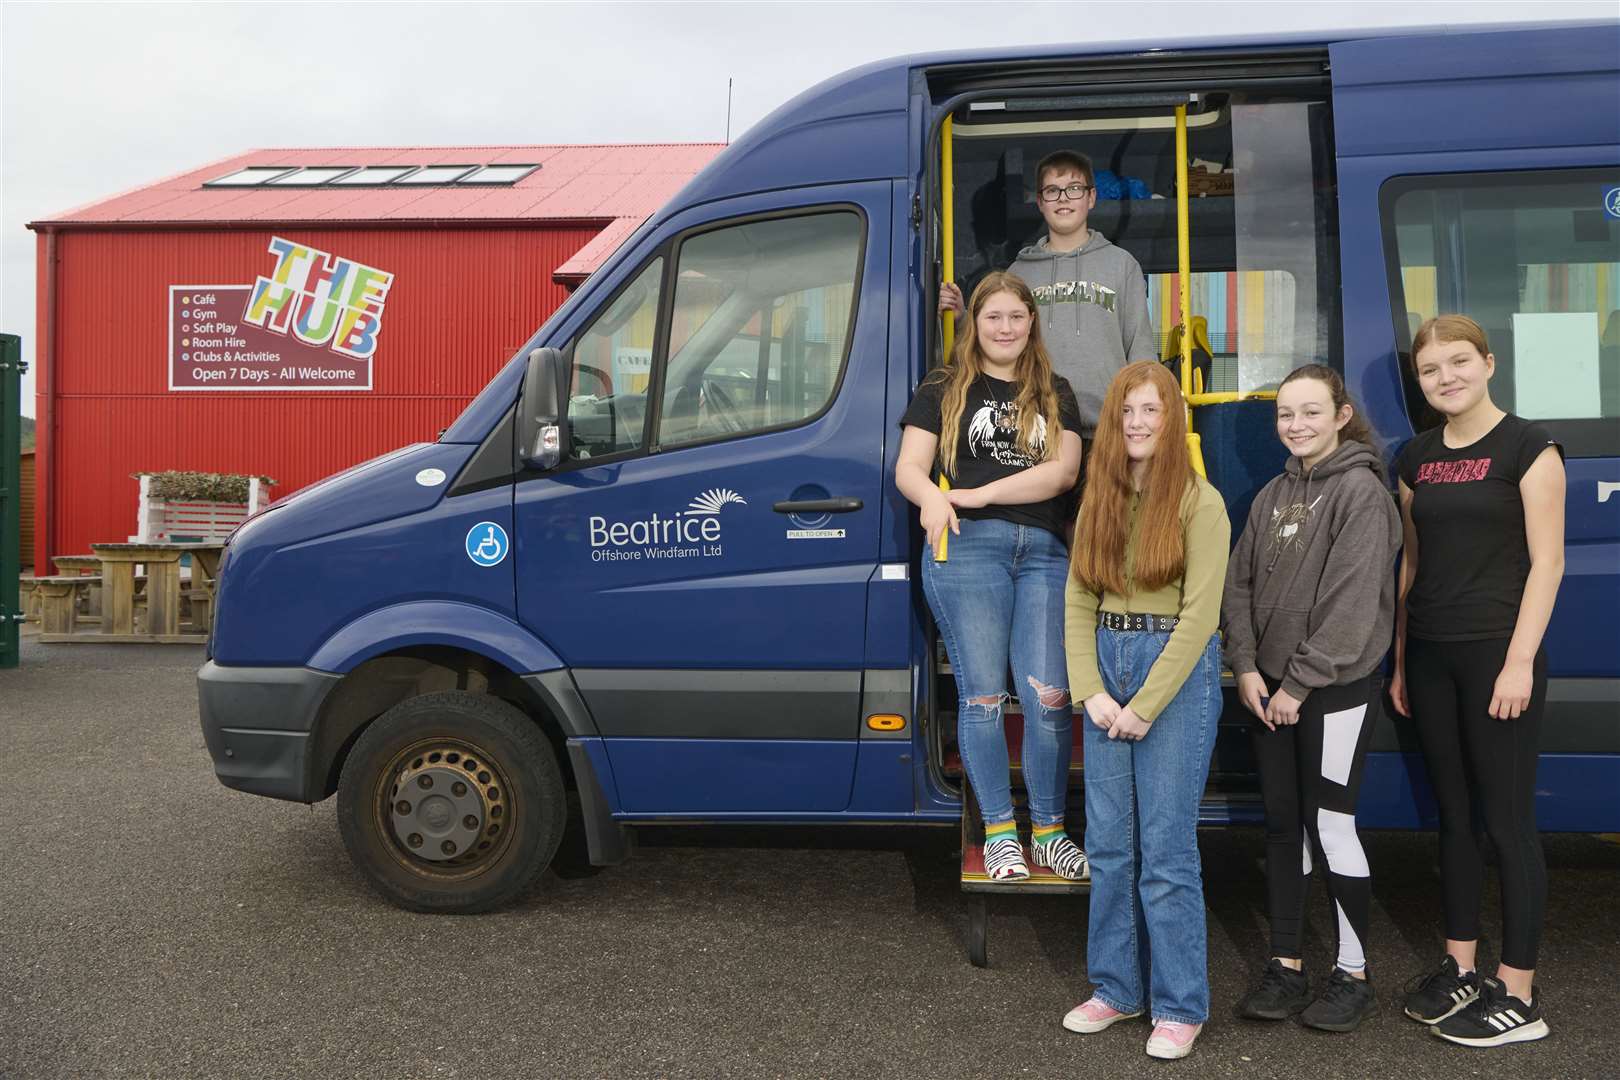 Among those hoping to make good use of the community bus are from left, Neave Warner-Mackintosh, Archie Robertson, Cameron Chalmers, Chloe Sawyer and Rhea Vetters.